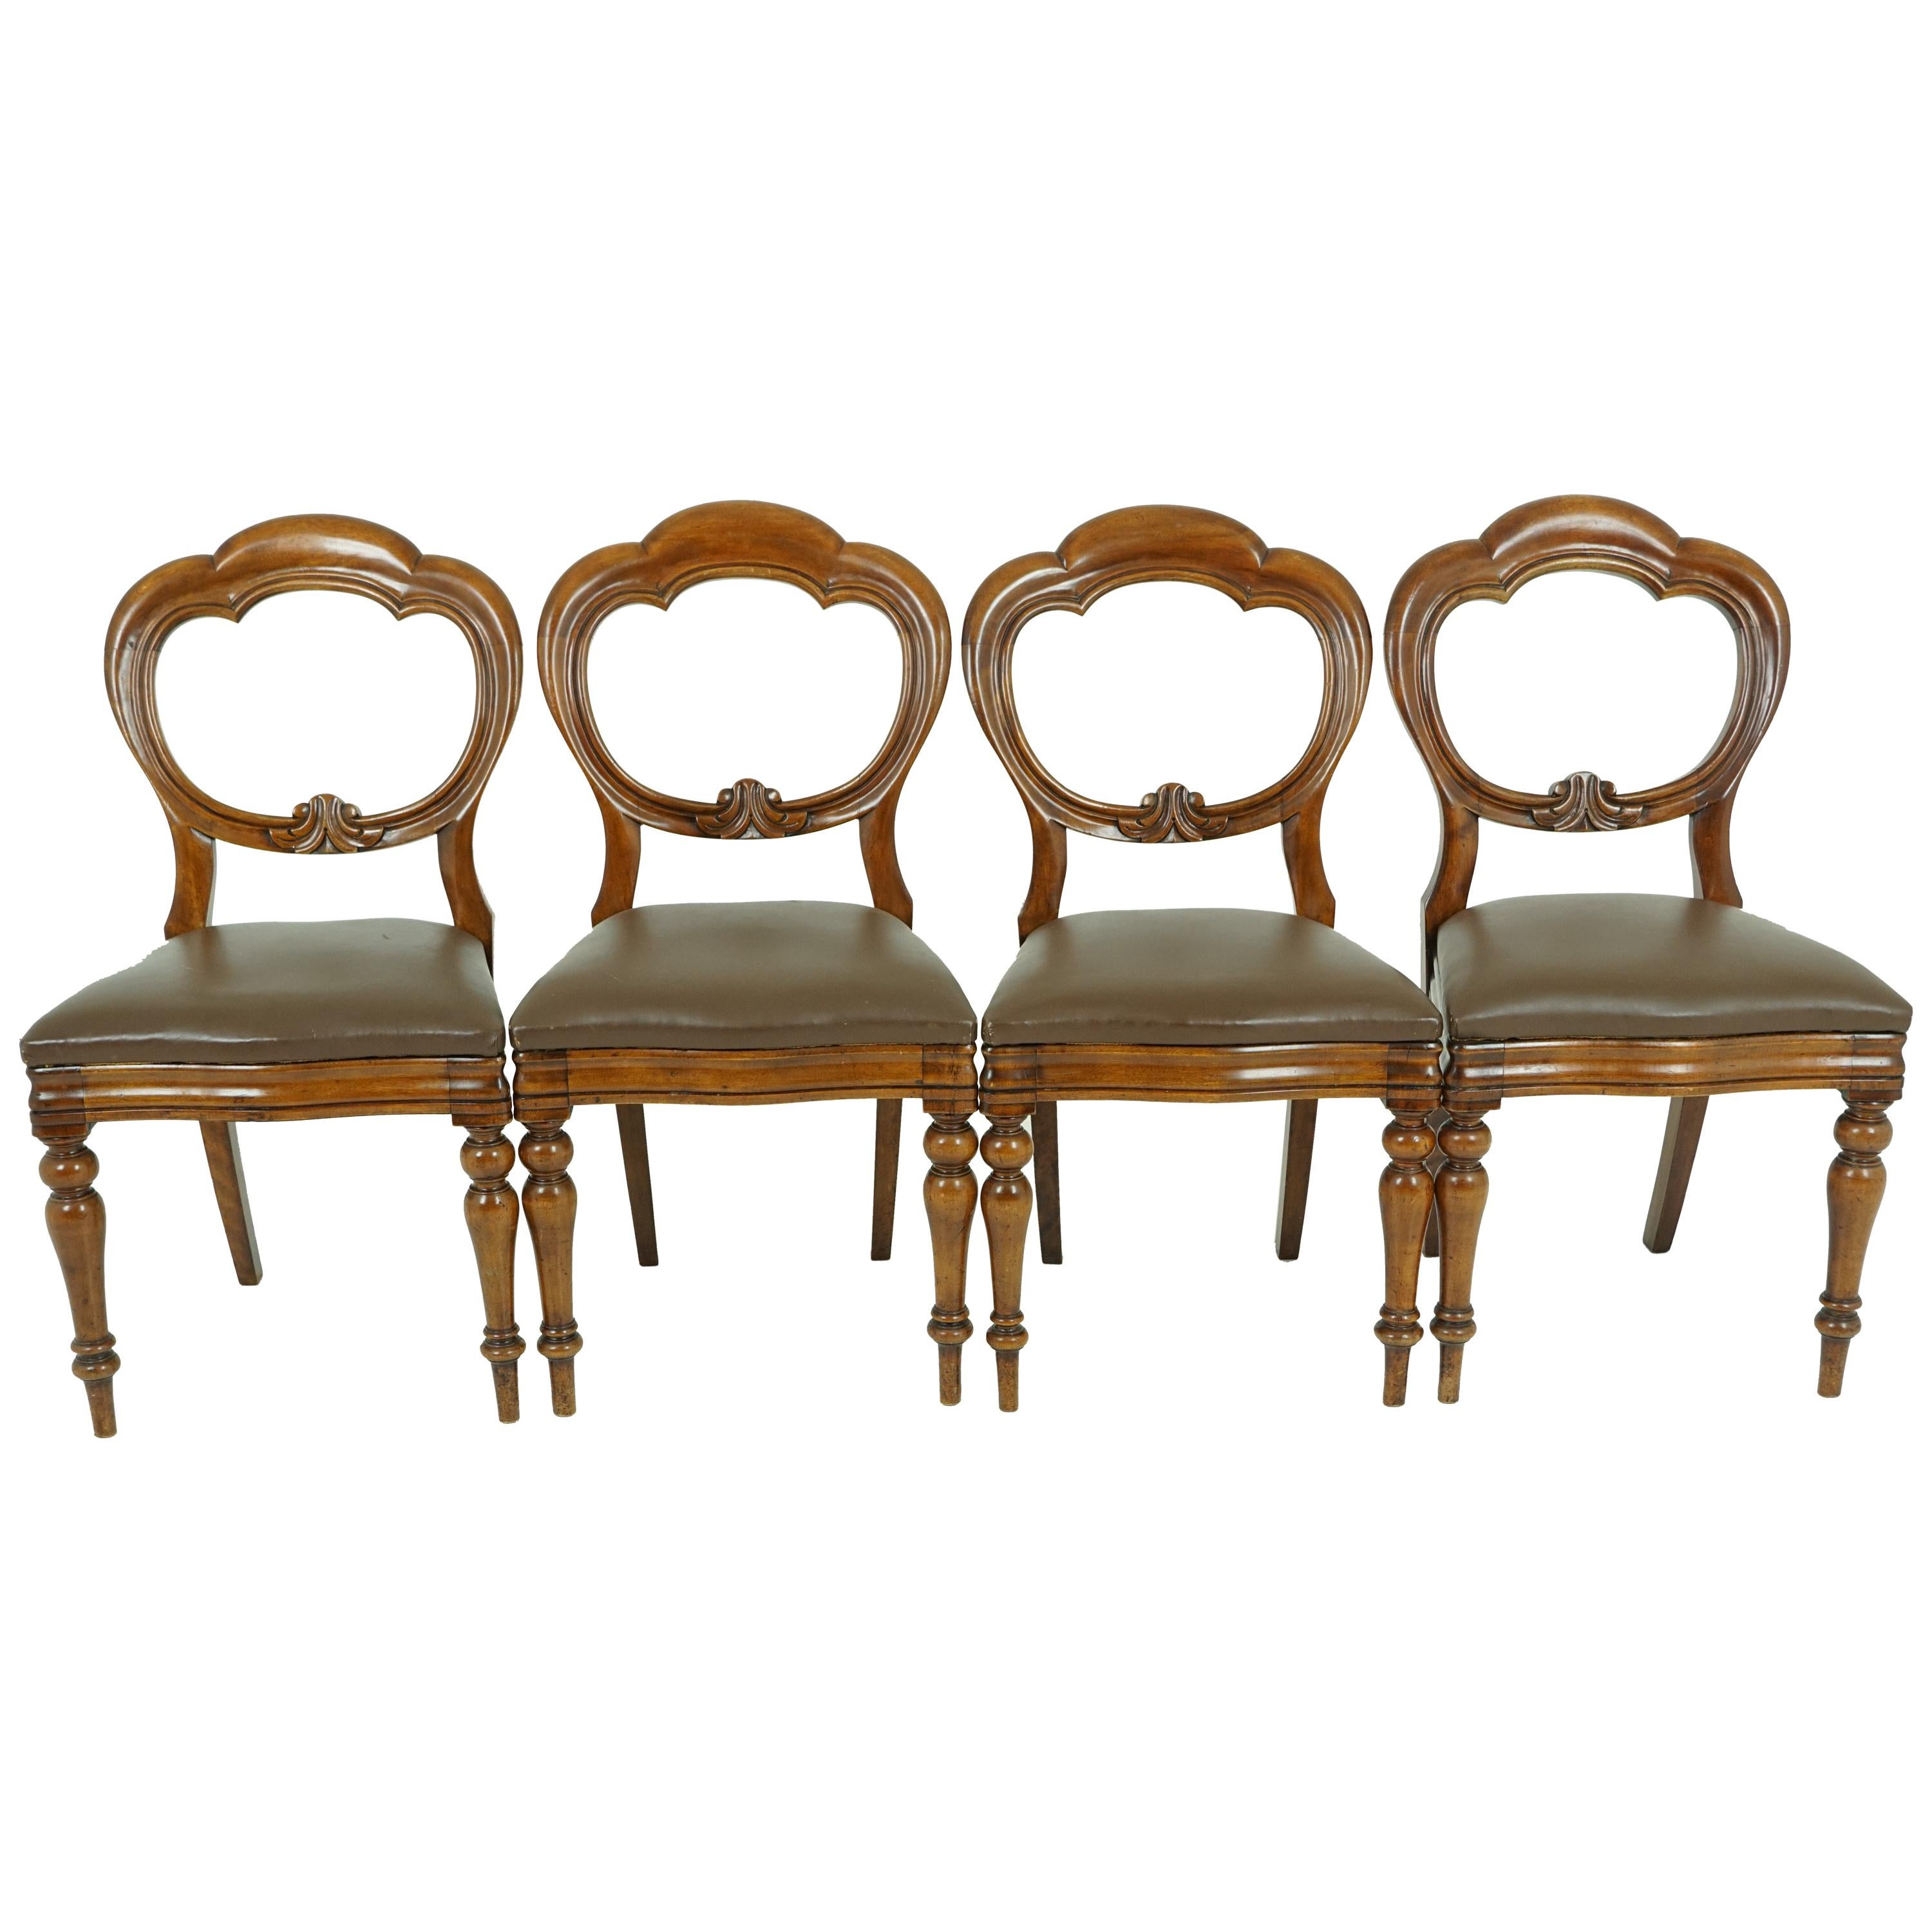 Antique 4 Balloon Back Dining Chairs, Antique Furniture, Scotland 1880, 1755